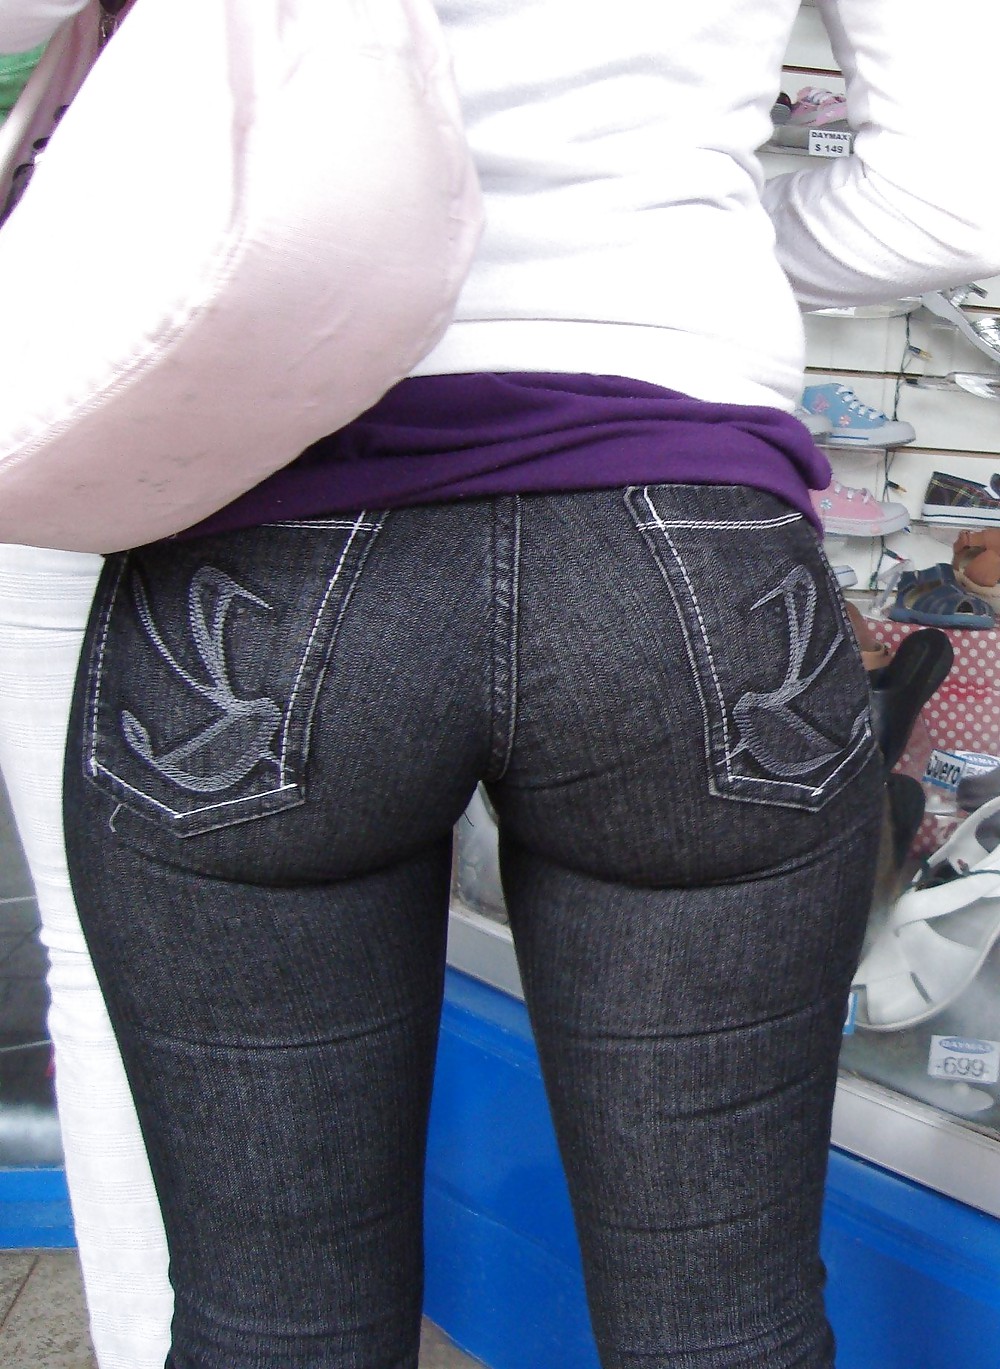 Free Asses in jeans #5 photos